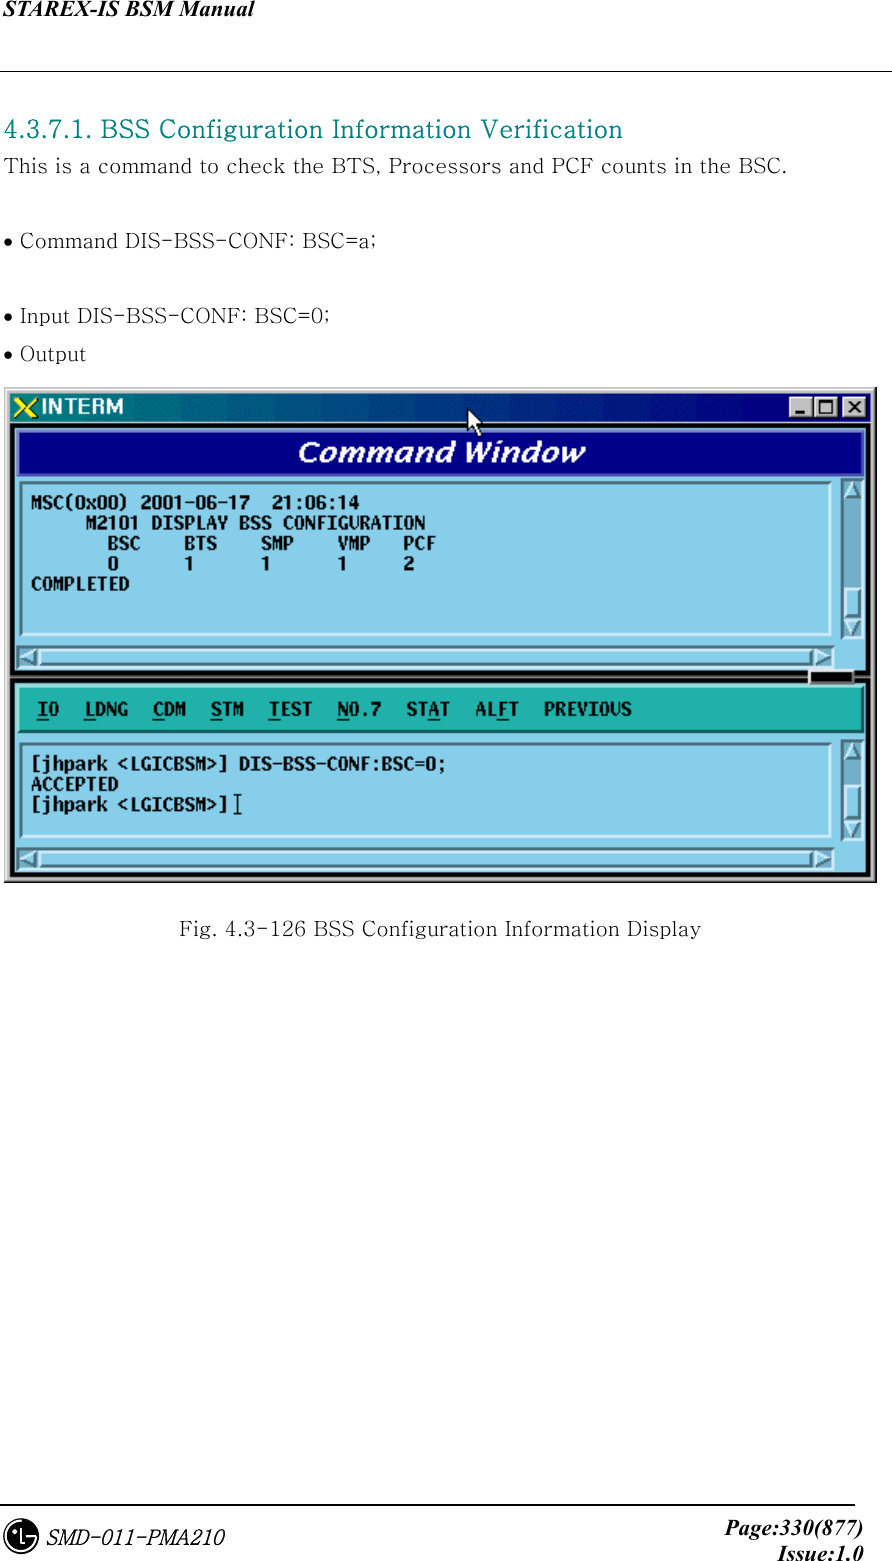 STAREX-IS BSM Manual     Page:330(877)Issue:1.0SMD-011-PMA210  4.3.7.1. BSS Configuration Information Verification This is a command to check the BTS, Processors and PCF counts in the BSC.     • Command DIS-BSS-CONF: BSC=a;    • Input DIS-BSS-CONF: BSC=0; • Output  Fig. 4.3-126 BSS Configuration Information Display 